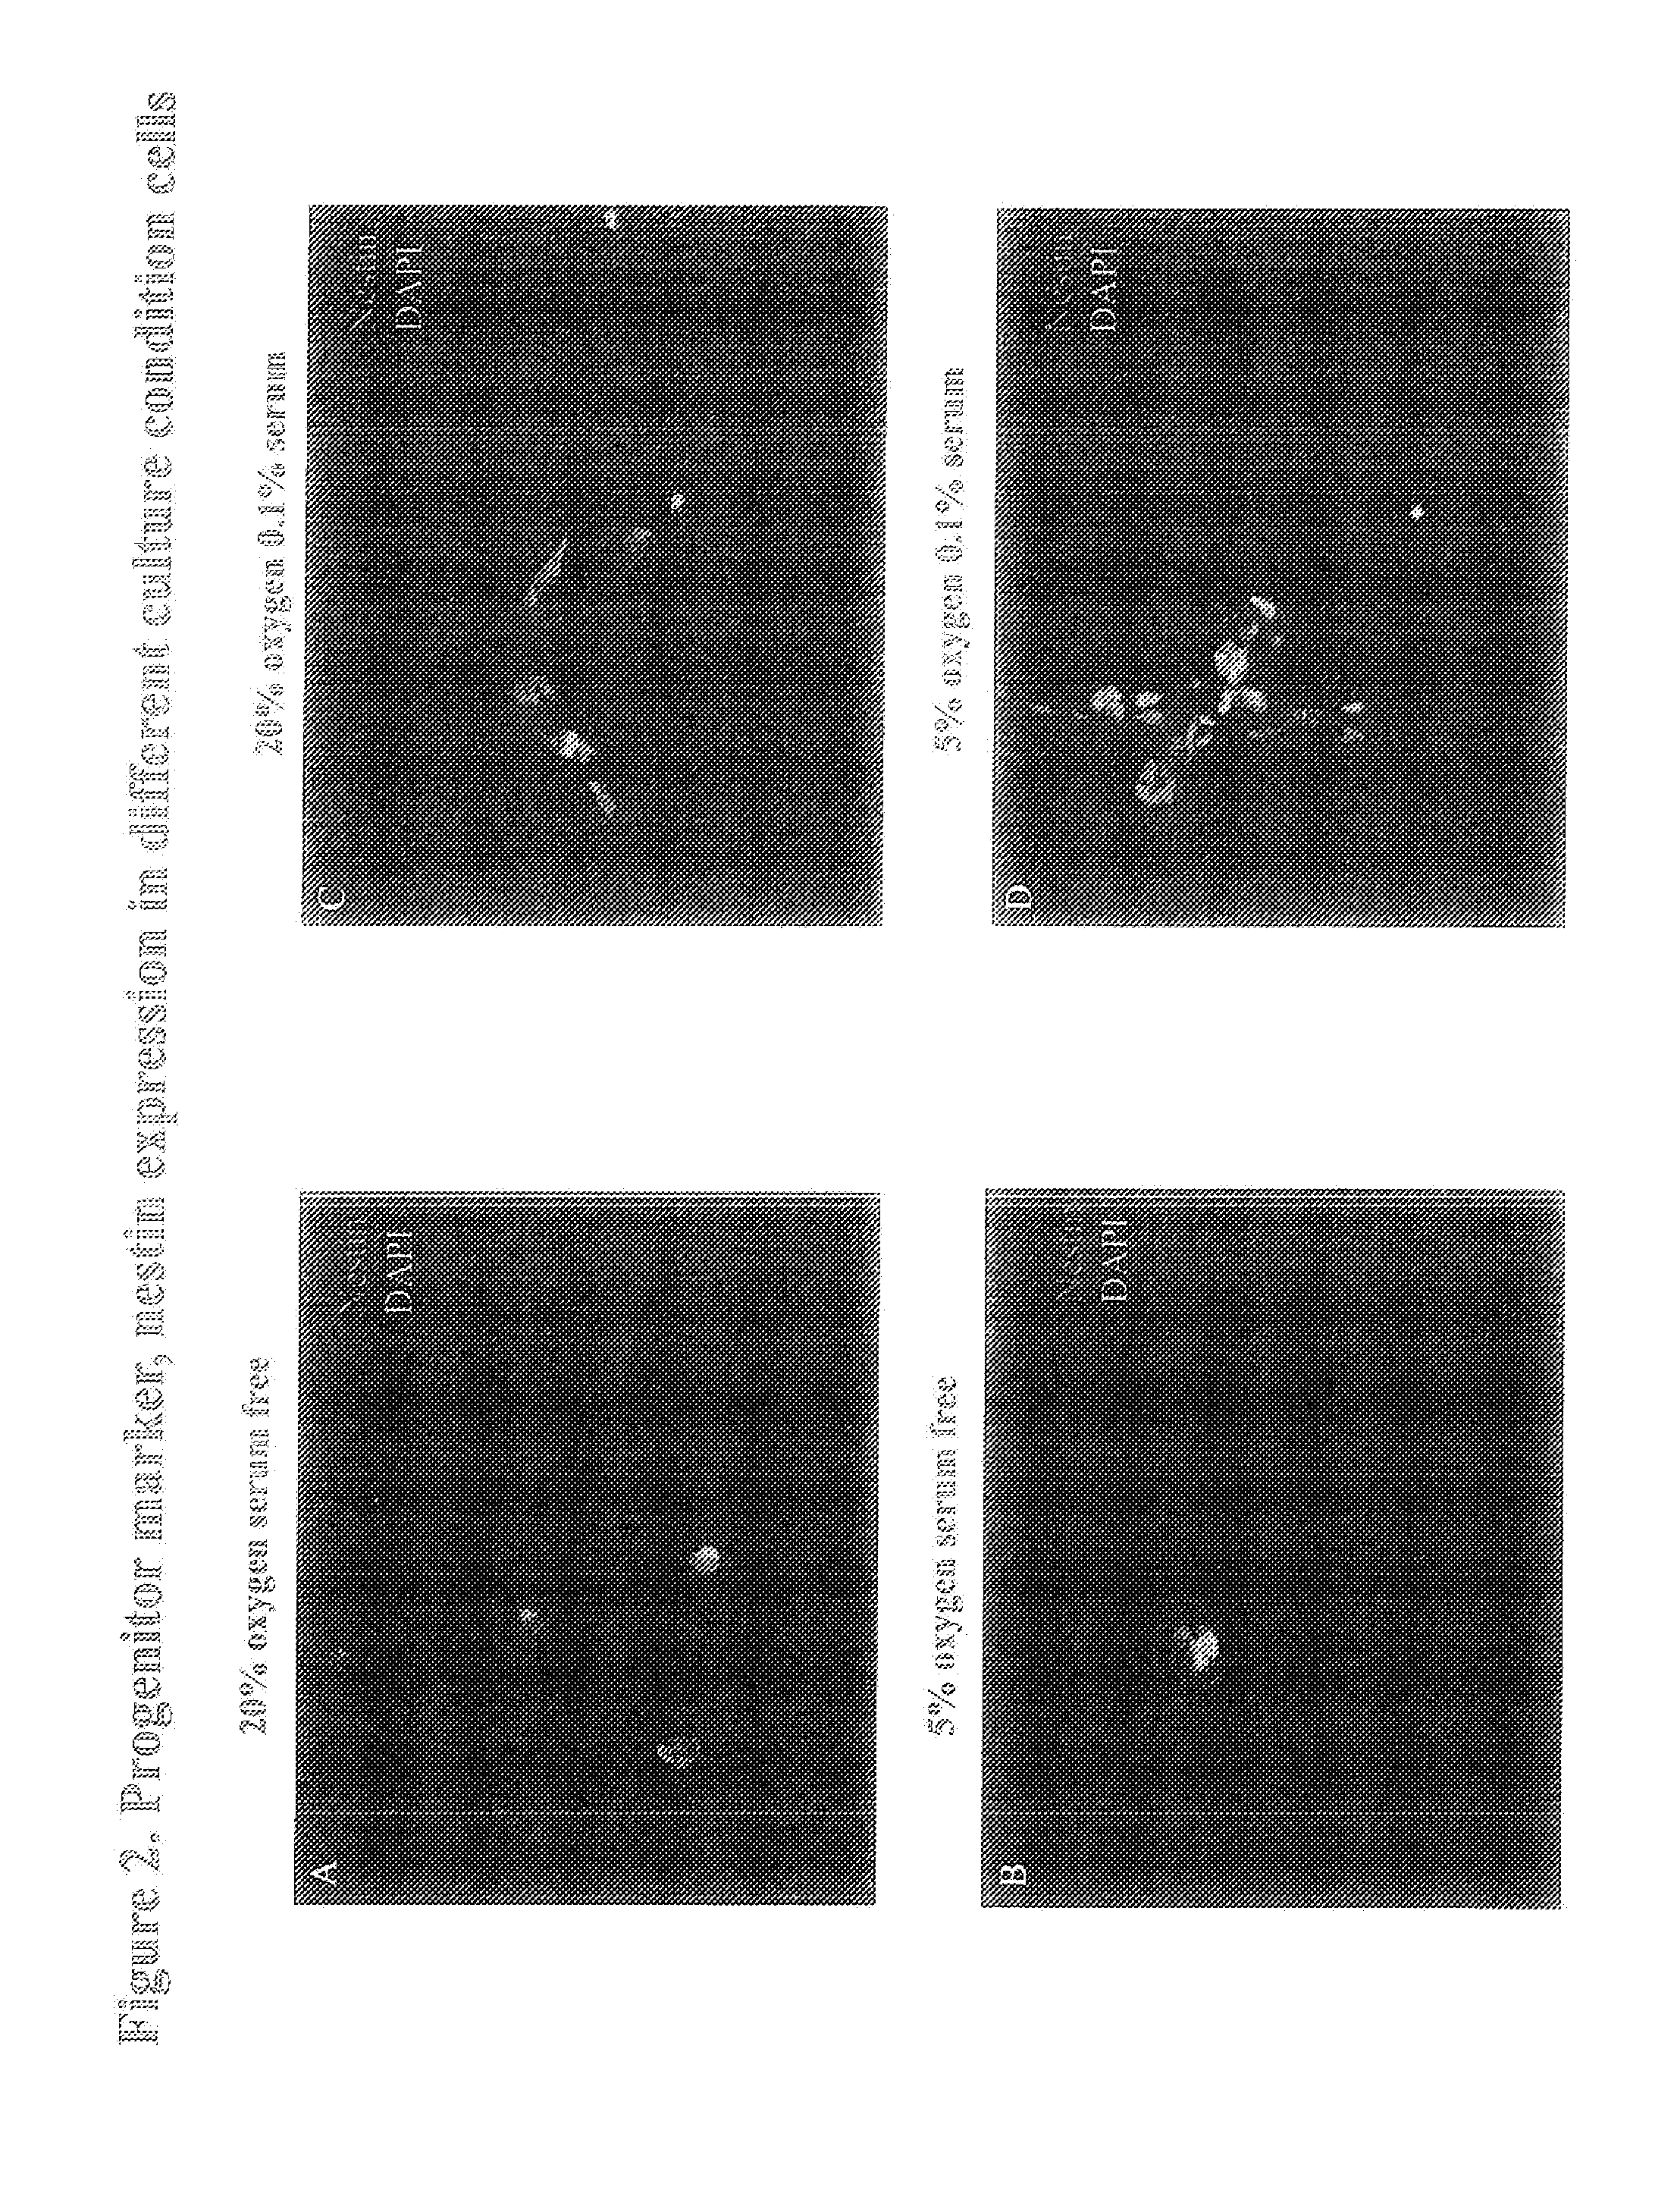 Compositions of stem cells and stem cell factors and methods for their use and manufacture